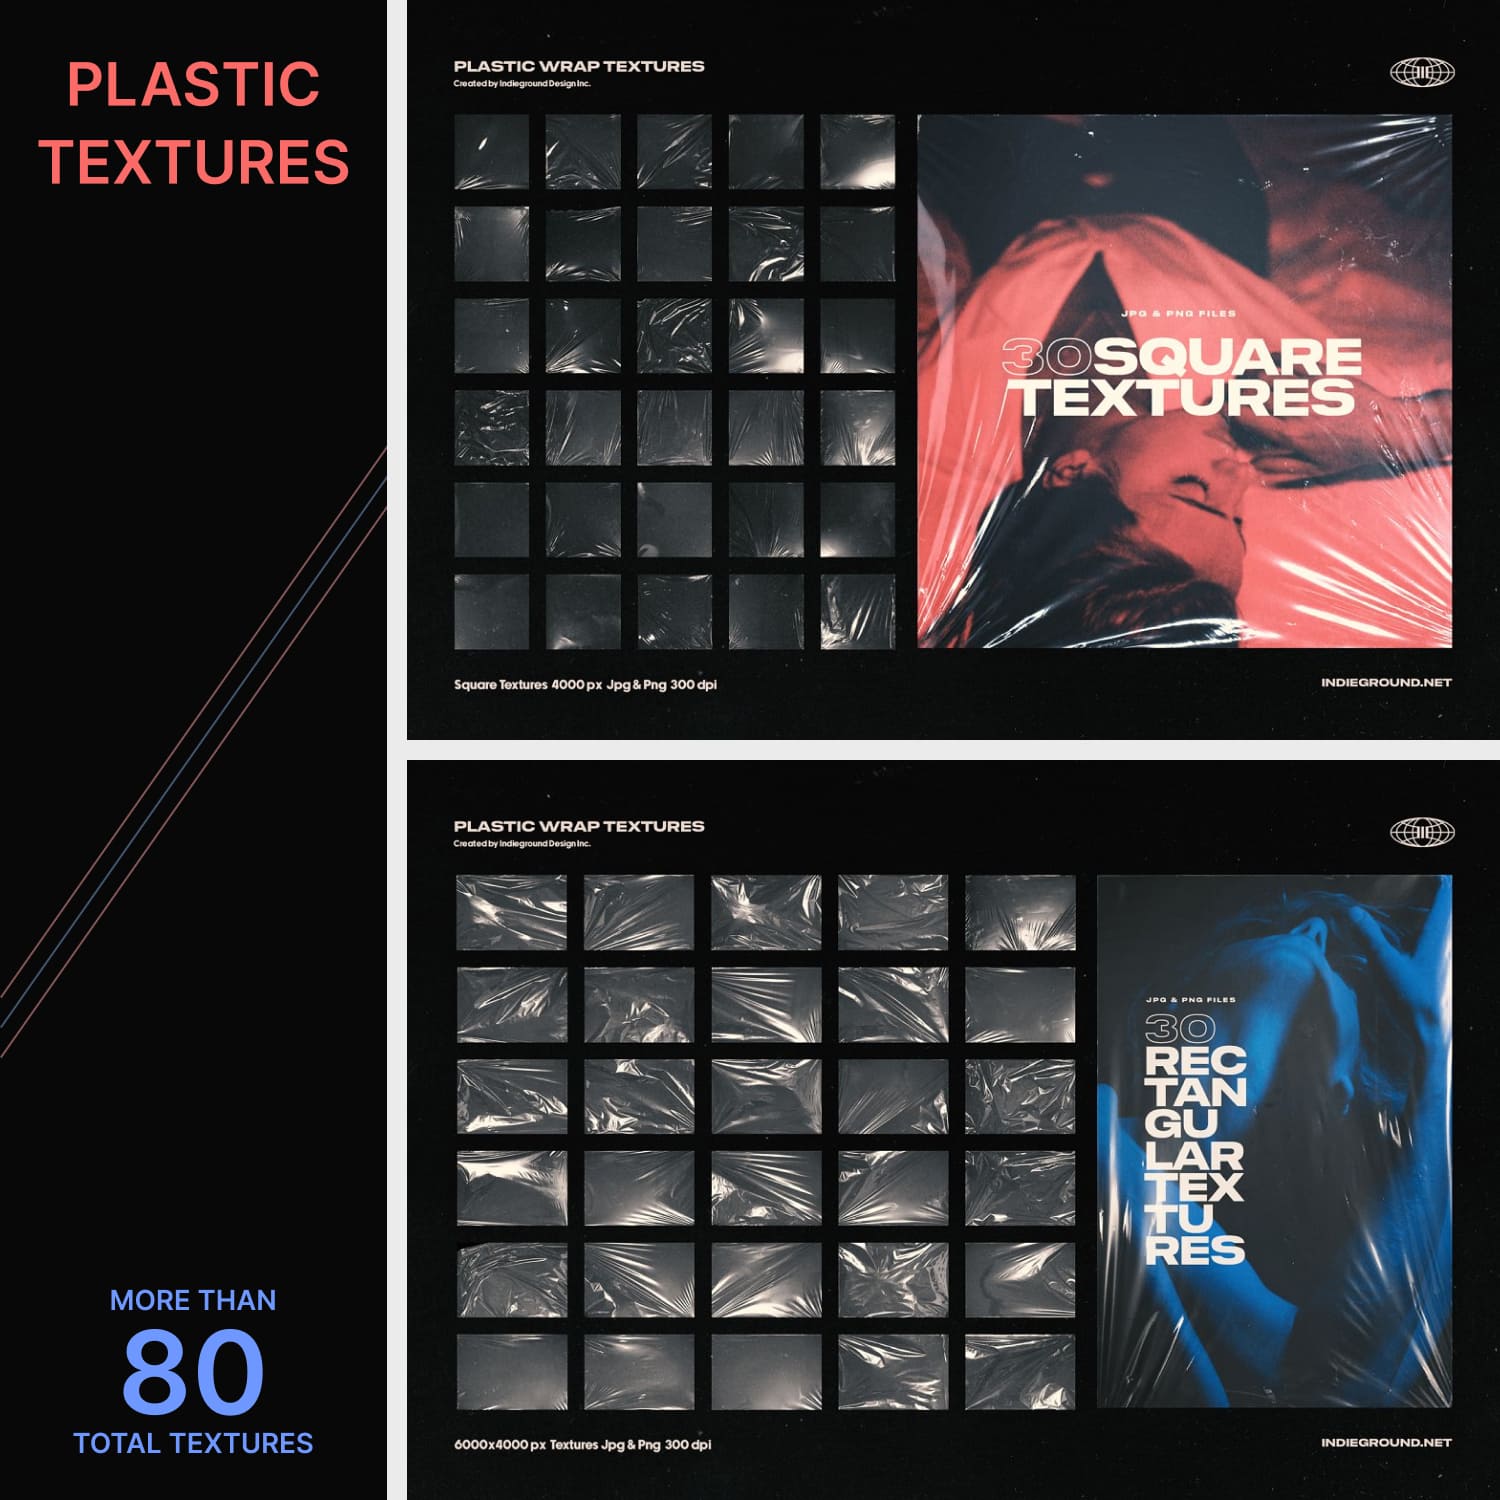 Plastic textures - main image preview.